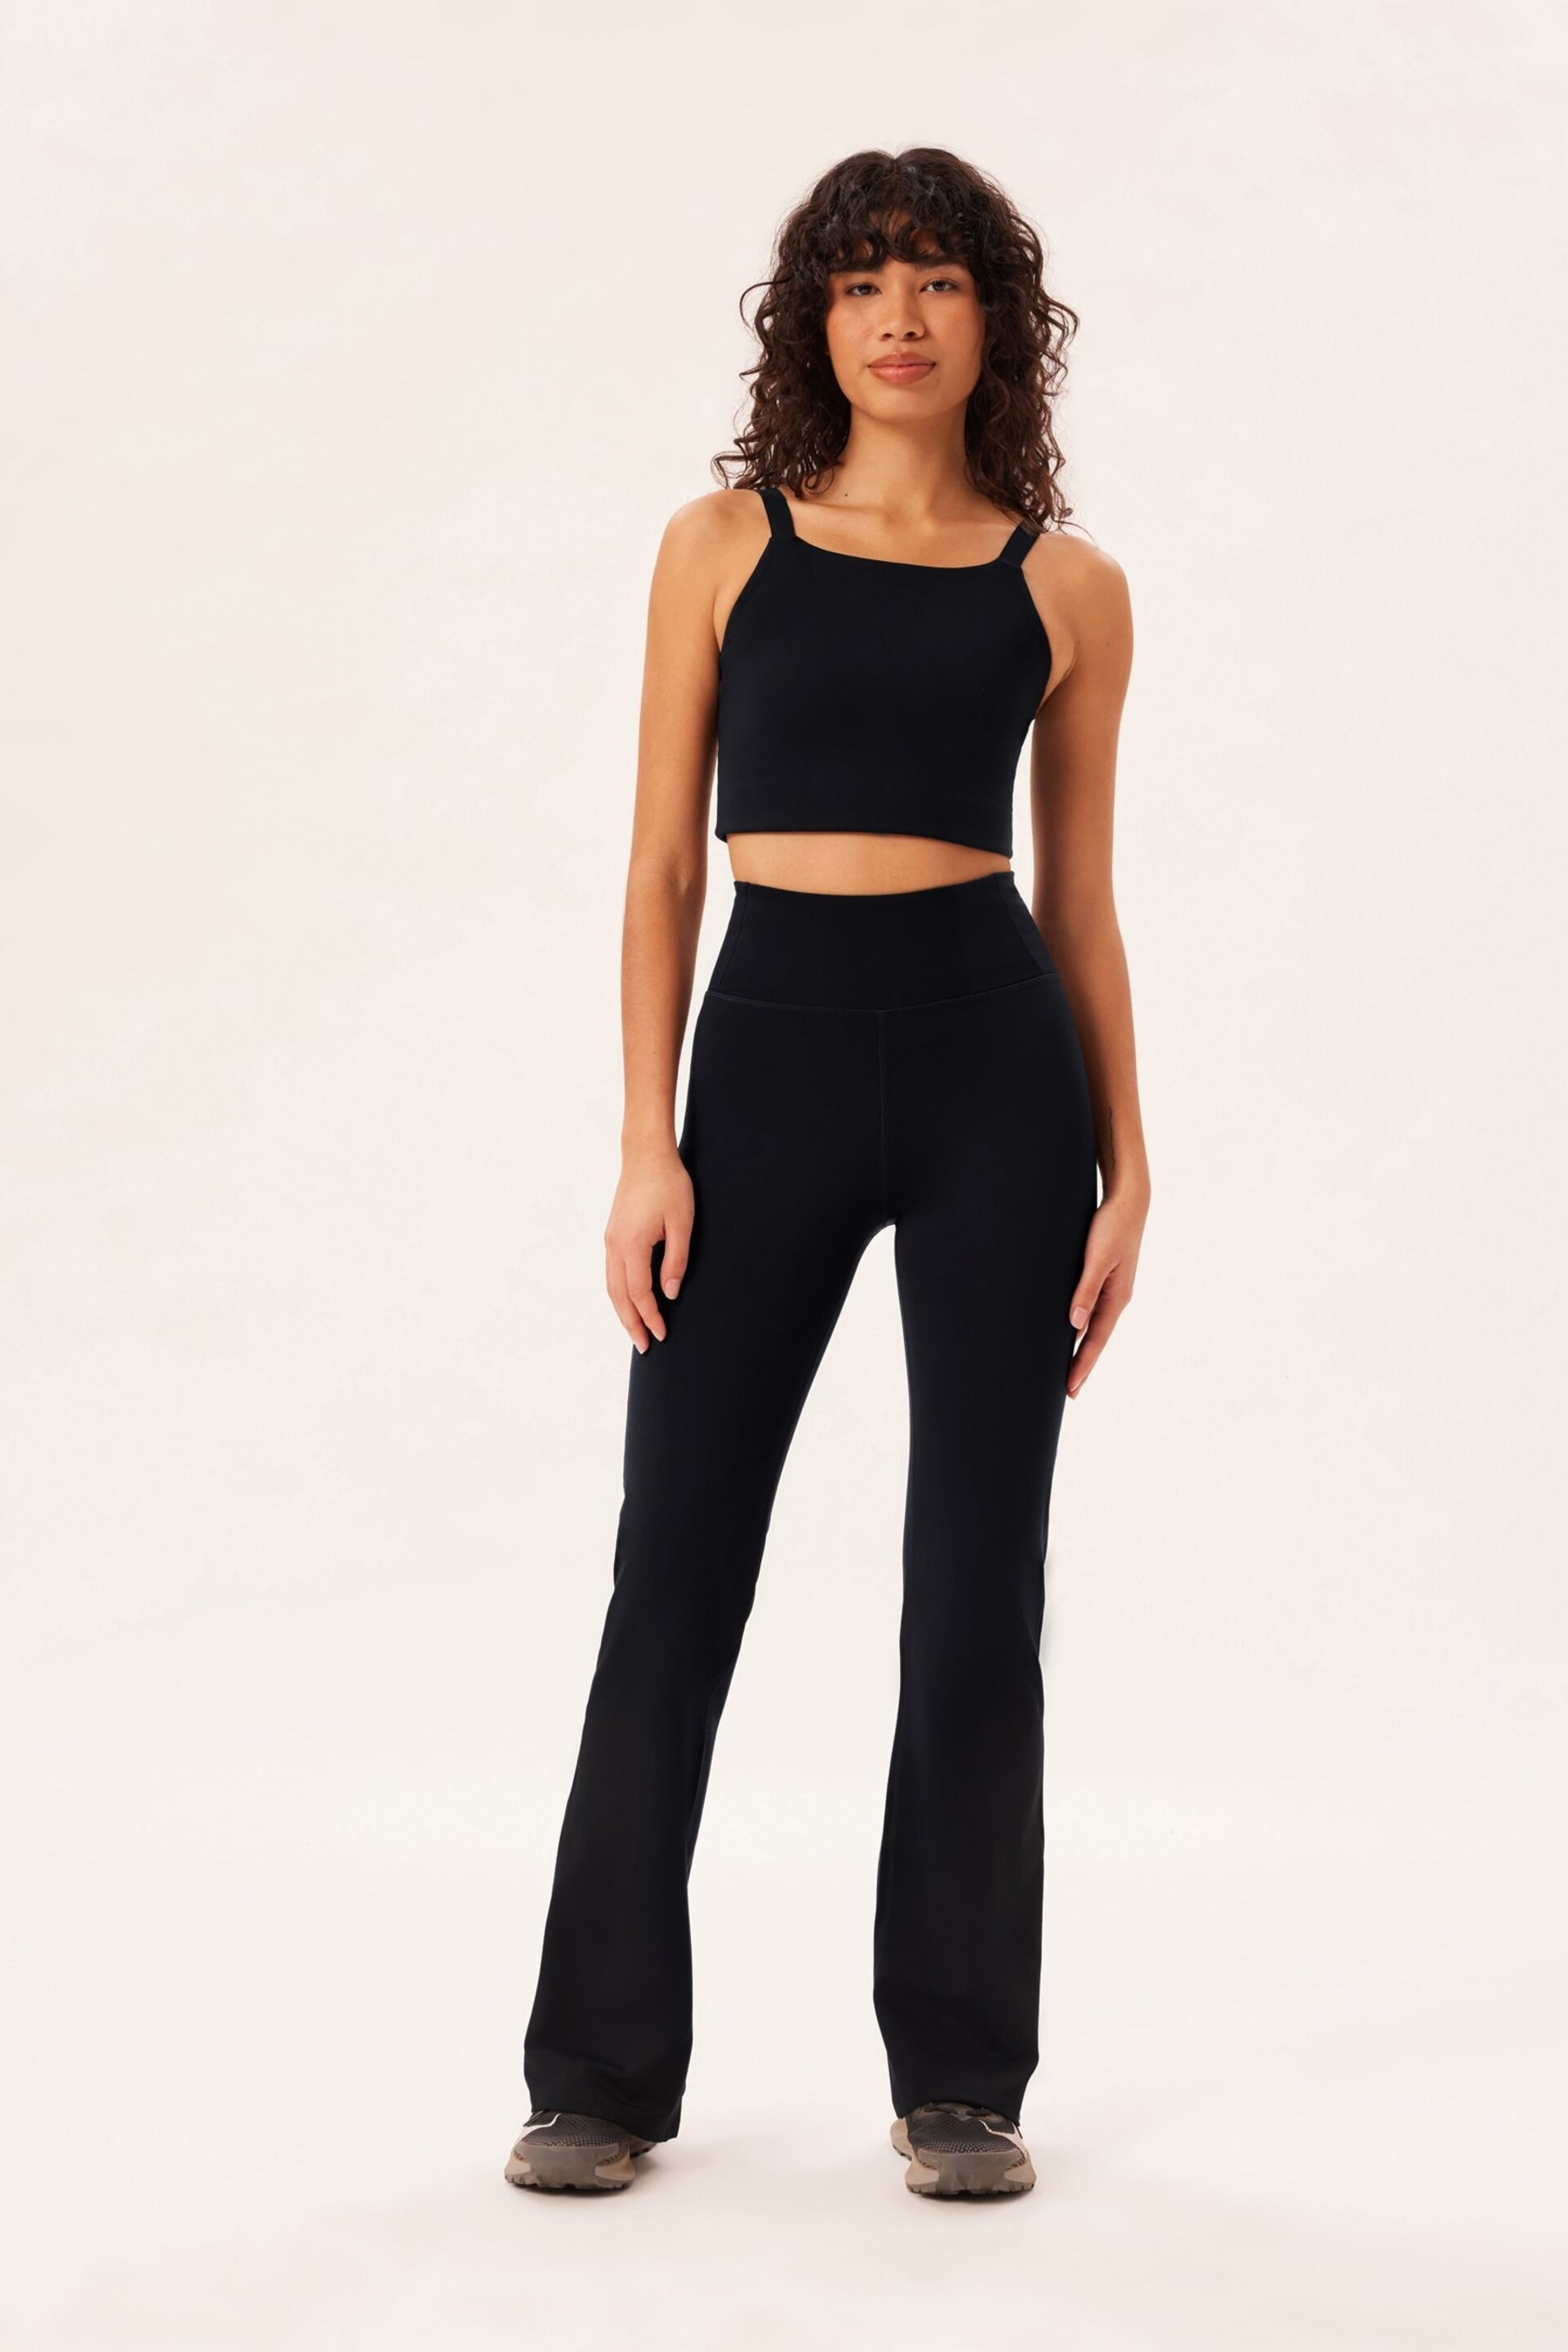 Girlfriend Collective Flare Black Leggings - Image 1 of 6